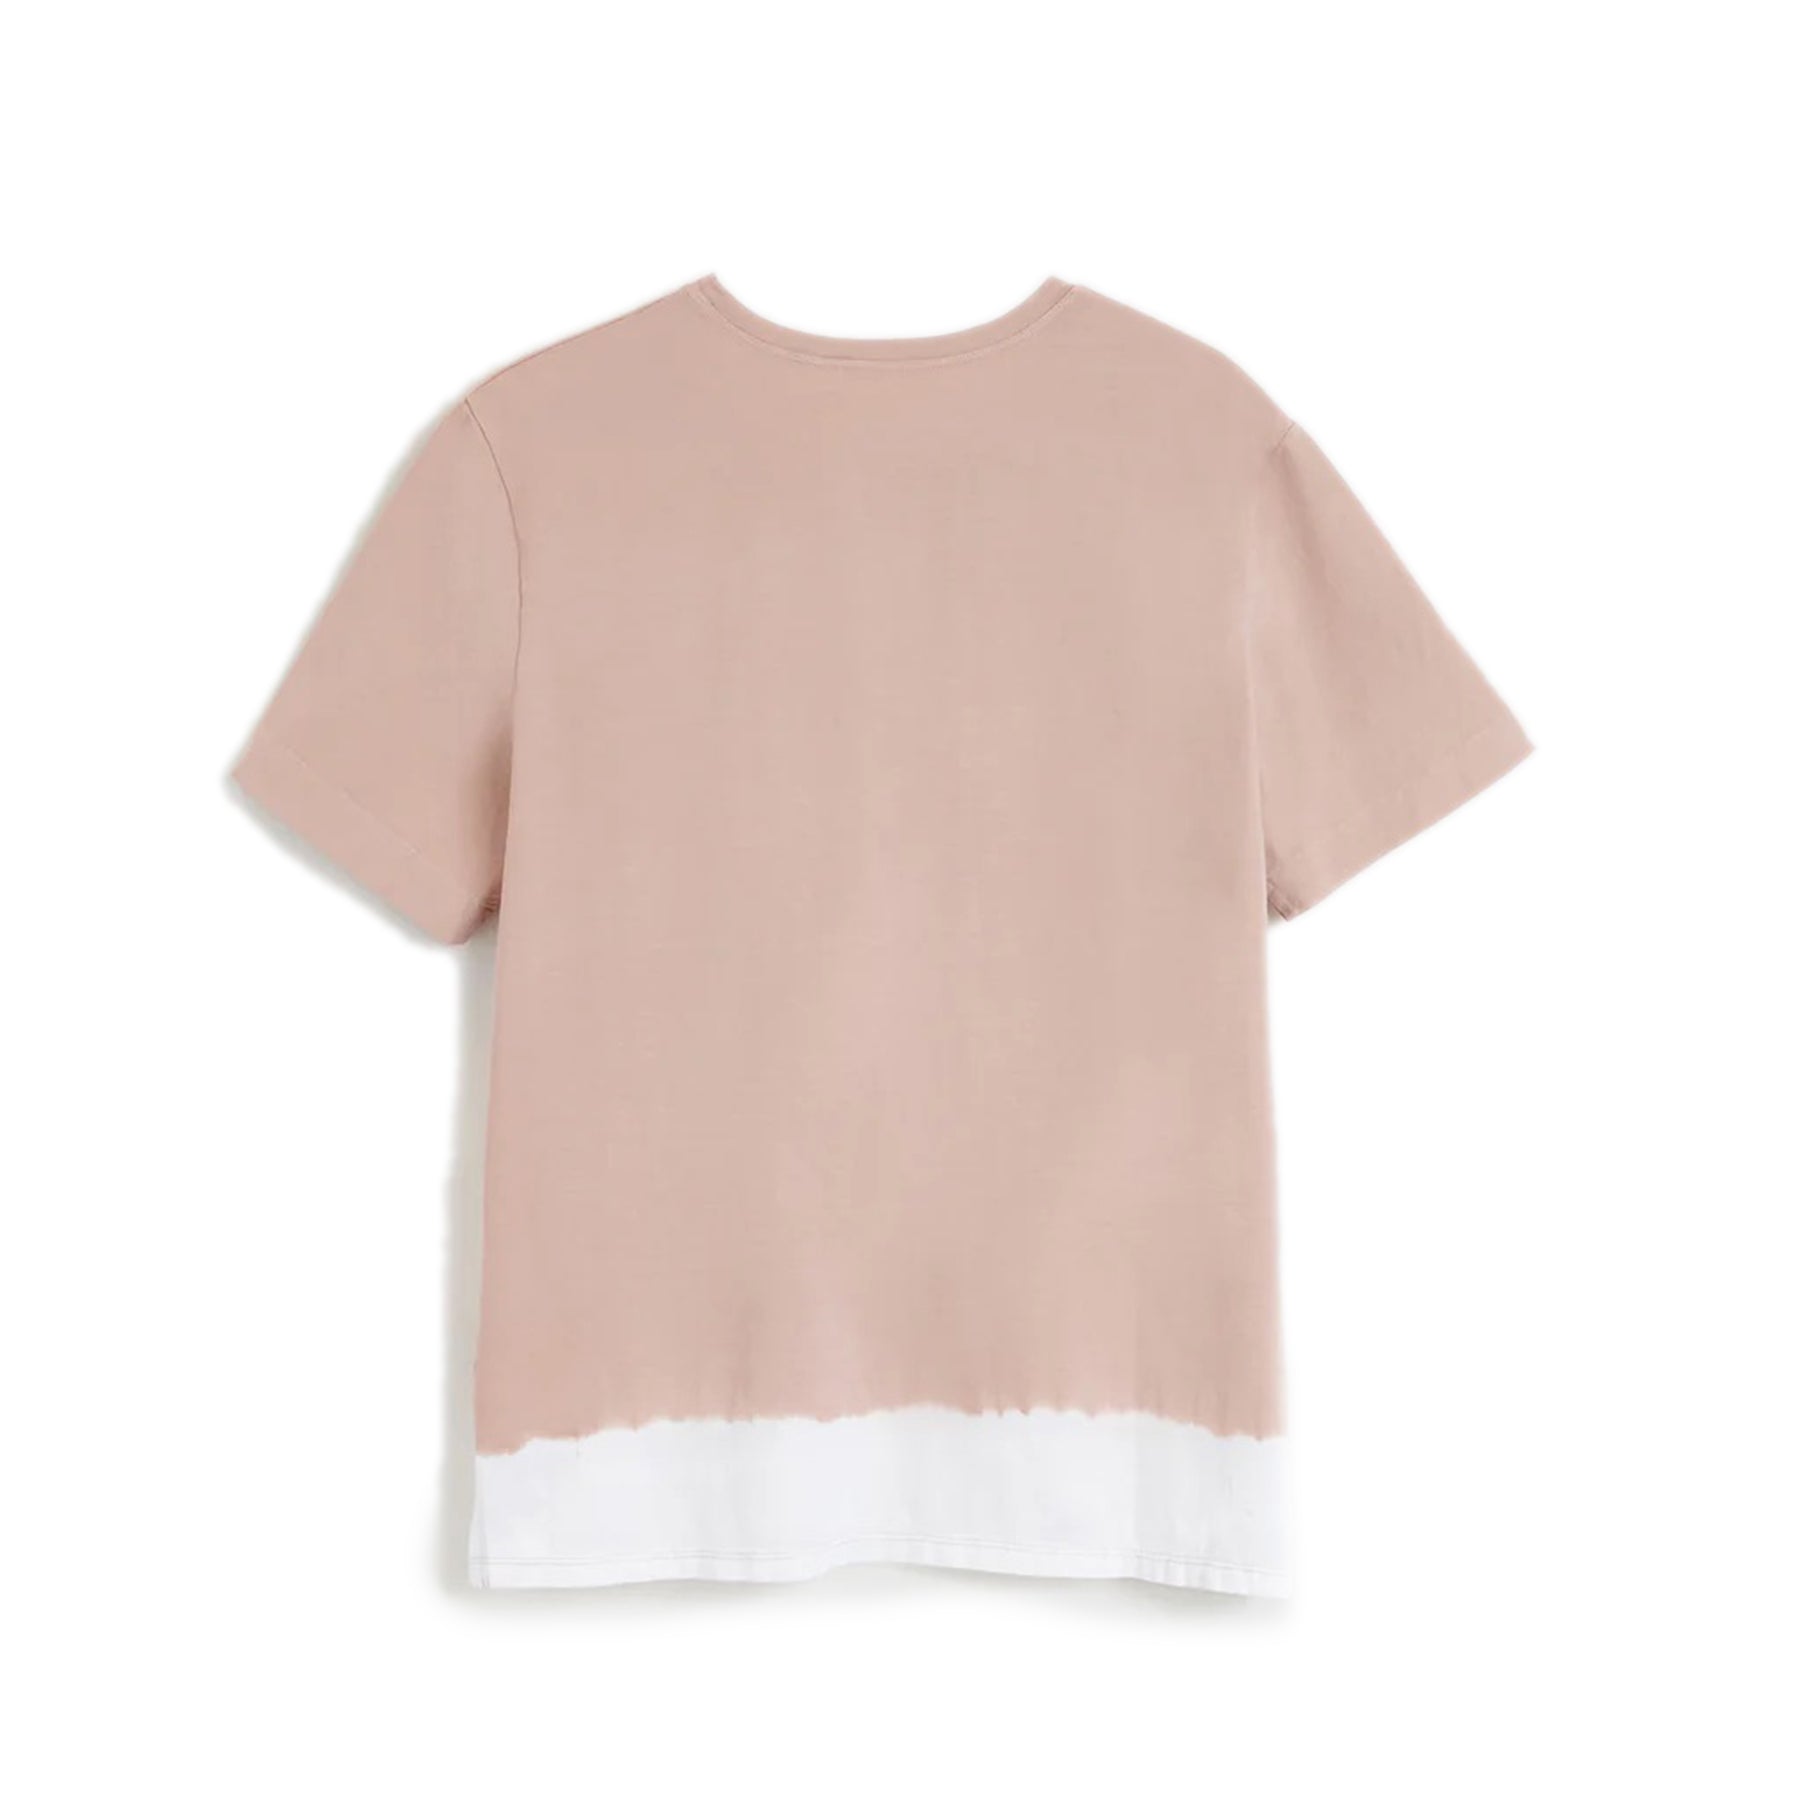 VICTOR T-SHIRT Light Pink crewneck t-shirt Hand dyed cotton jersey Chest pocket with embroidered artwork Composition: 100% cotton Dry clean Country of origin: Italy